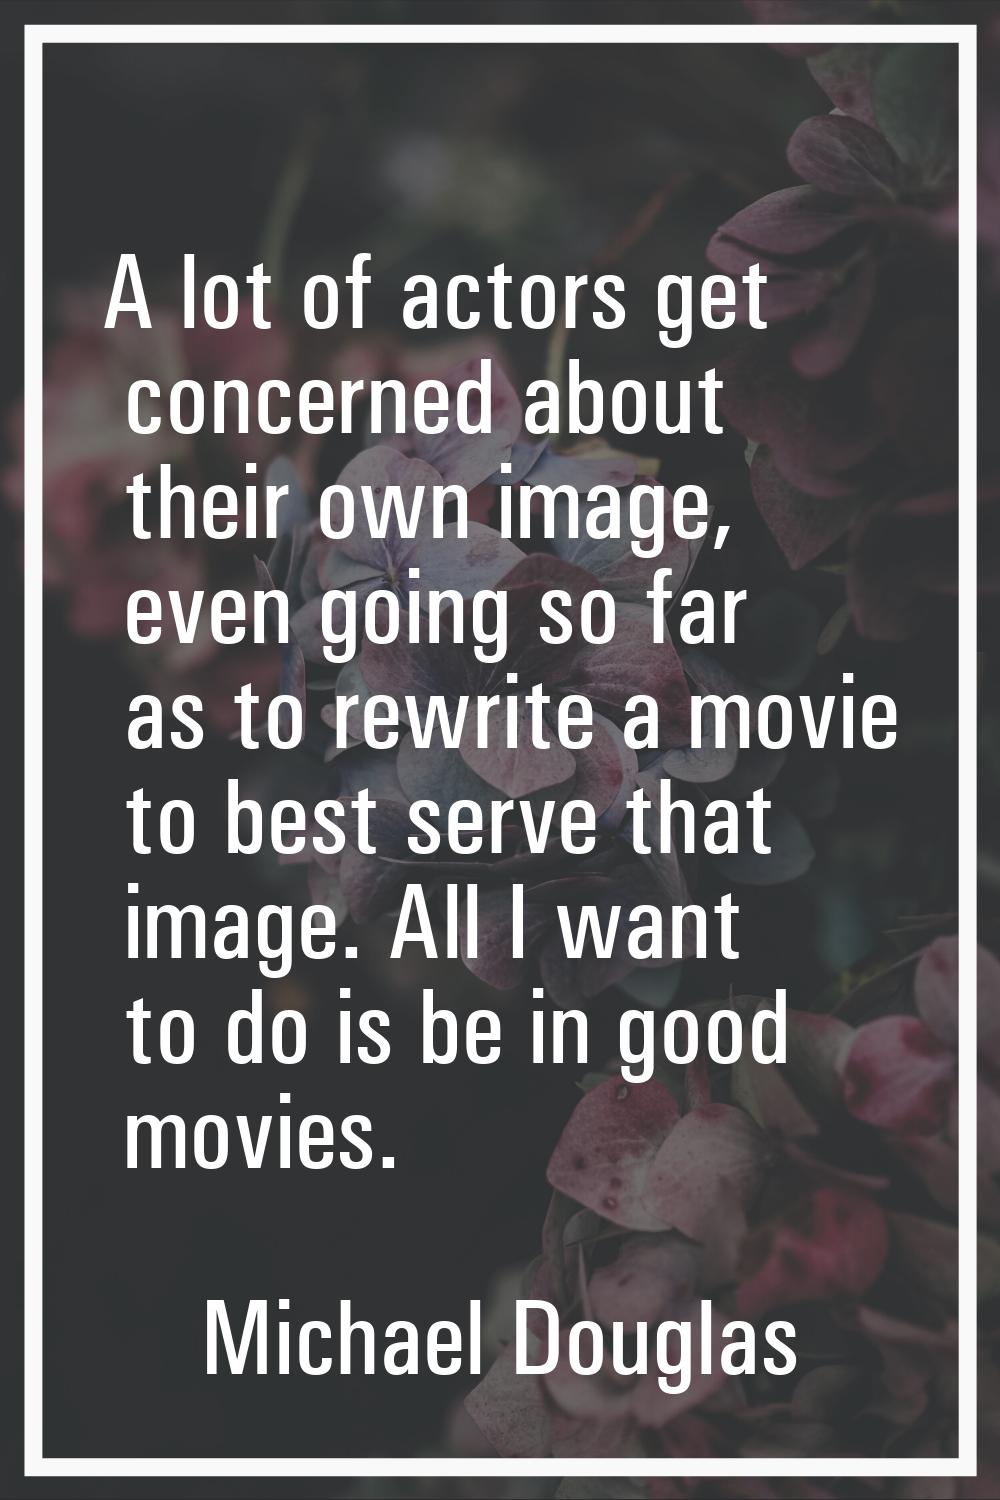 A lot of actors get concerned about their own image, even going so far as to rewrite a movie to bes